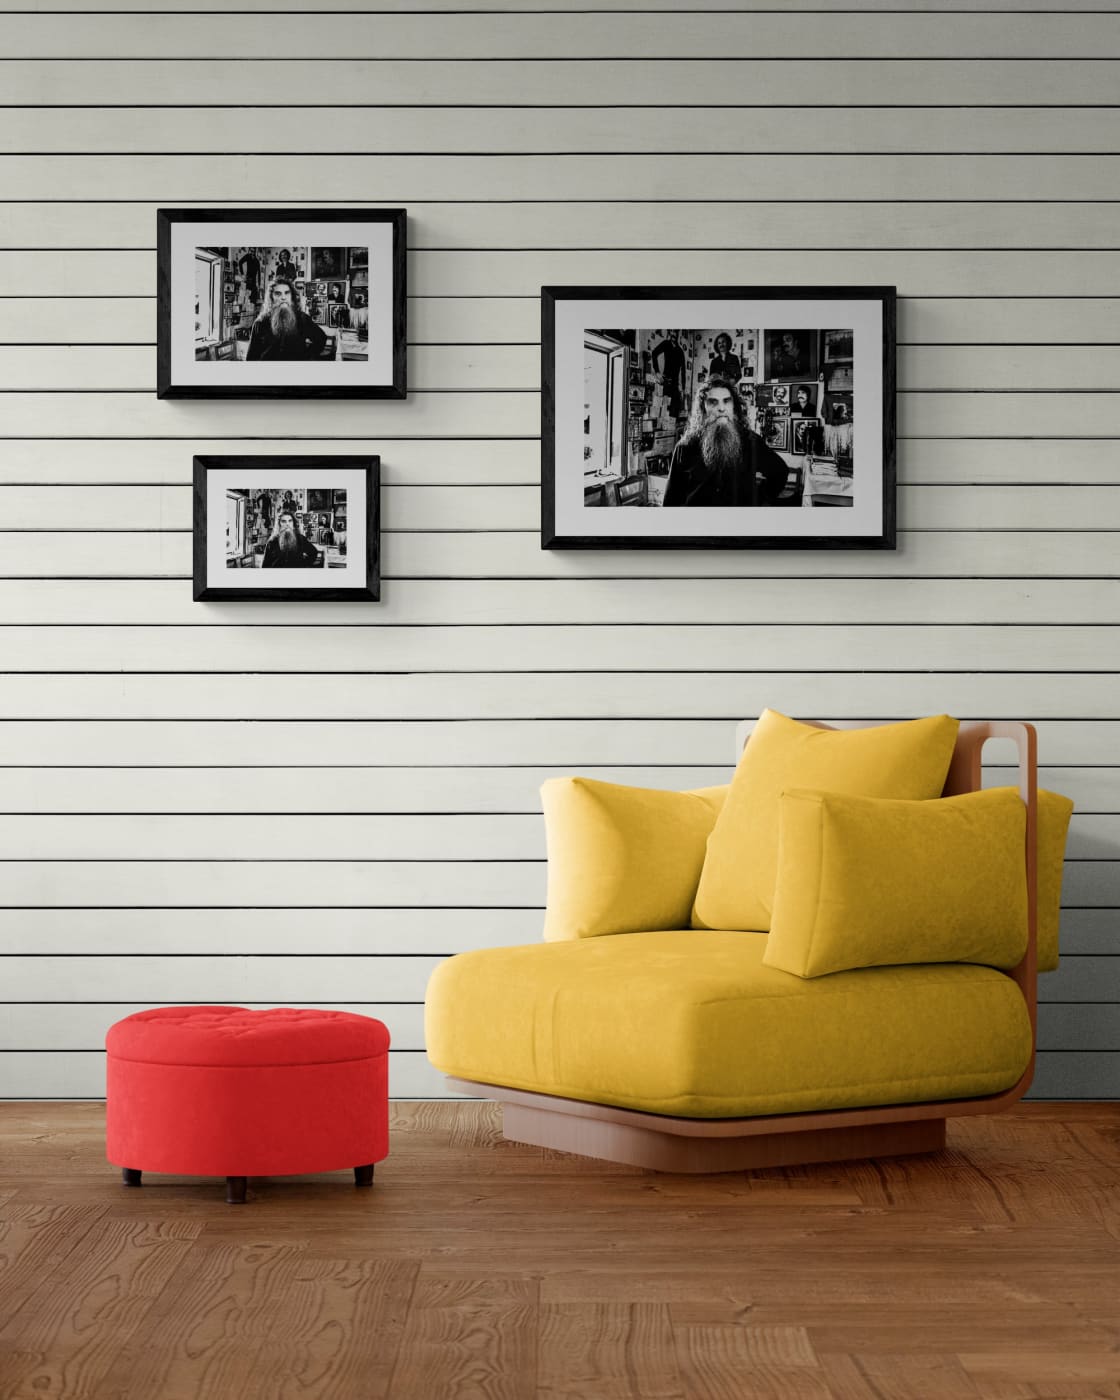 Black and White Photography Wall Art Greece | Antonis Xylouris (Psarantonis) in his brother’s house Anogia Crete by George Tatakis - framing options